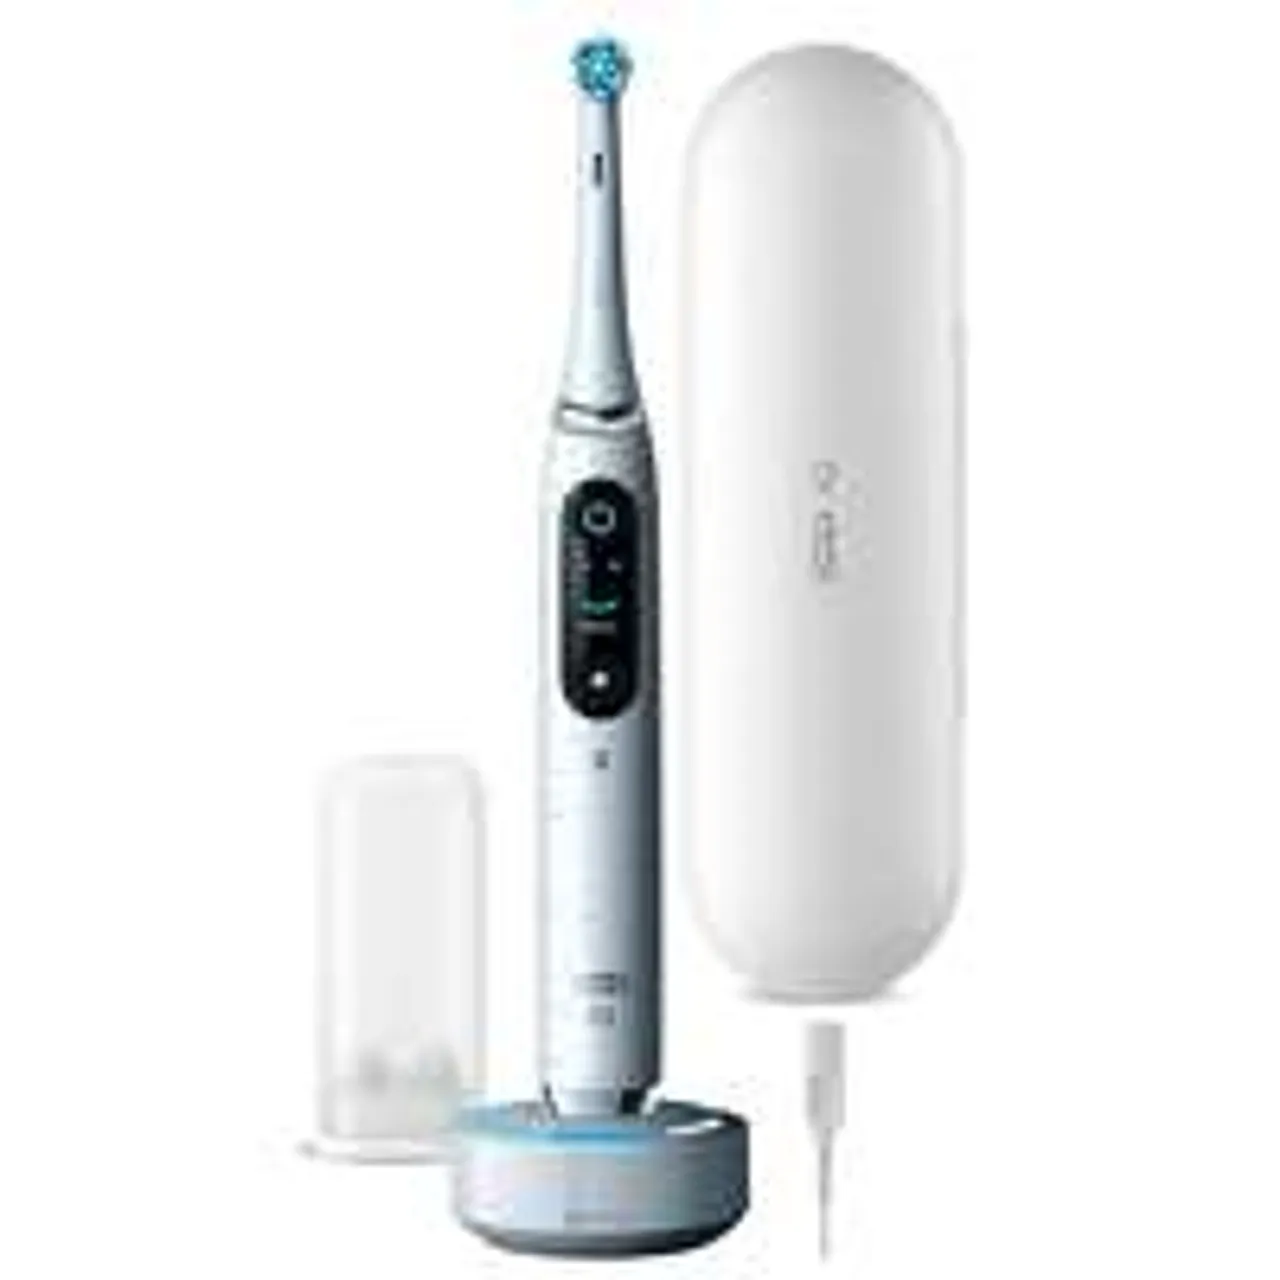 Oral-B iO 10 Stardust White Electric Toothbrush with Charging Travel Case